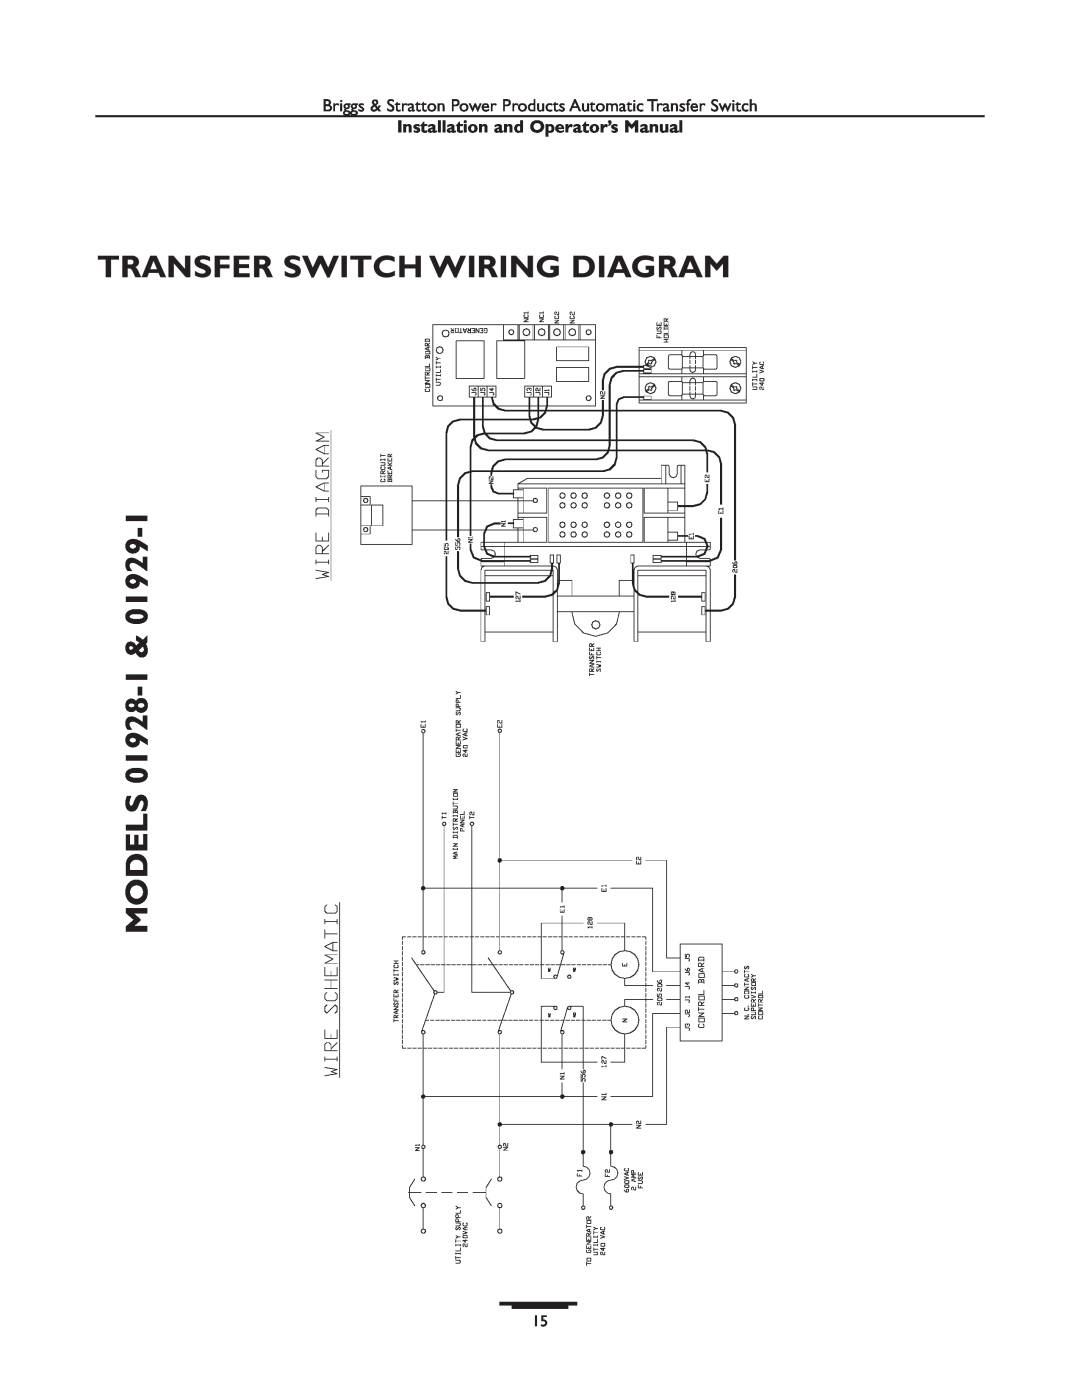 Briggs & Stratton 01813-1, 01814-1 manual TRANSFER SWITCH WIRING DIAGRAM MODELS 01928-1, Installation and Operator’s Manual 